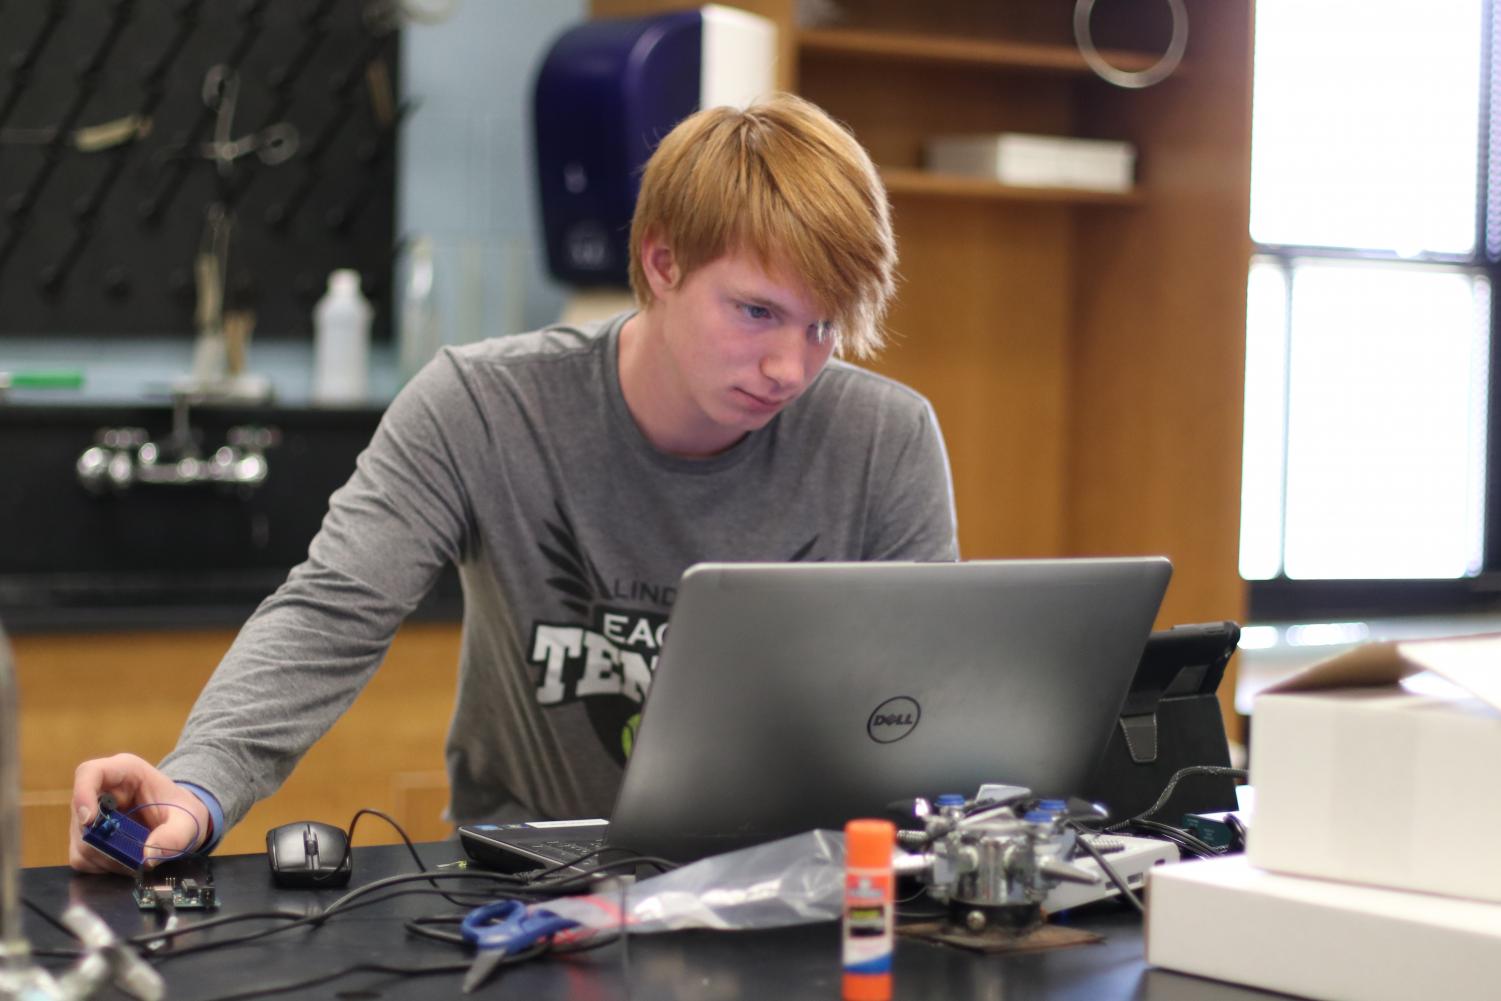 Senior Stefan Gregg works on programming a song with the Arduino. “We have to learn how to put a Breadboard together and attach it to the Arduino to bring the code into it,” Gregg said. “If you have any music knowledge, you use that to get the correct notes.”
